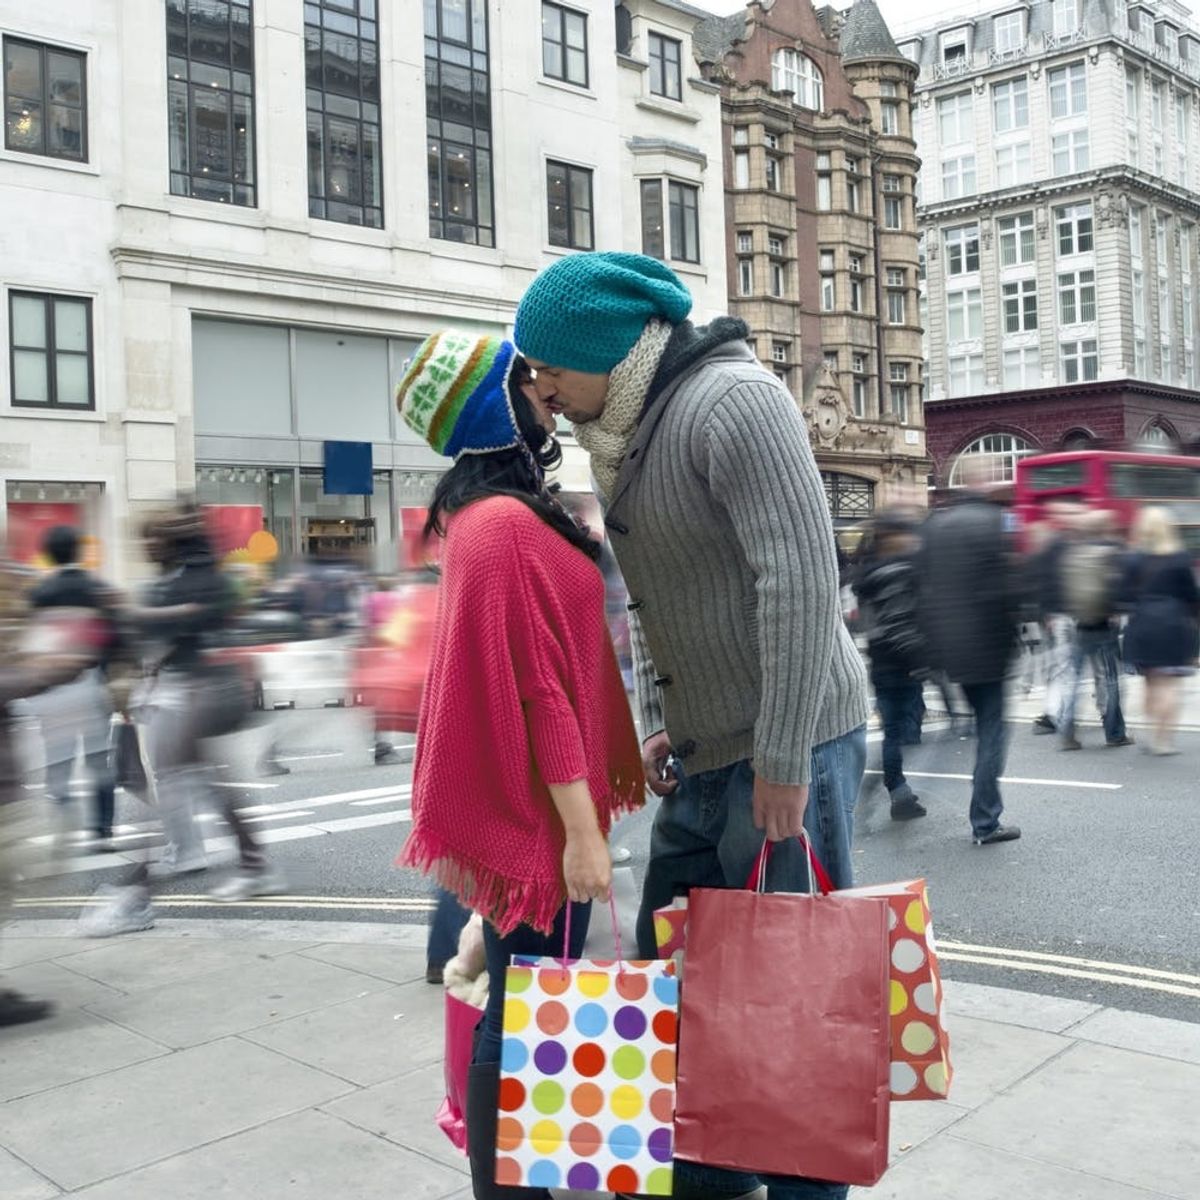 5 Tips for Making Holiday Shopping Stress-Free With Your S.O.